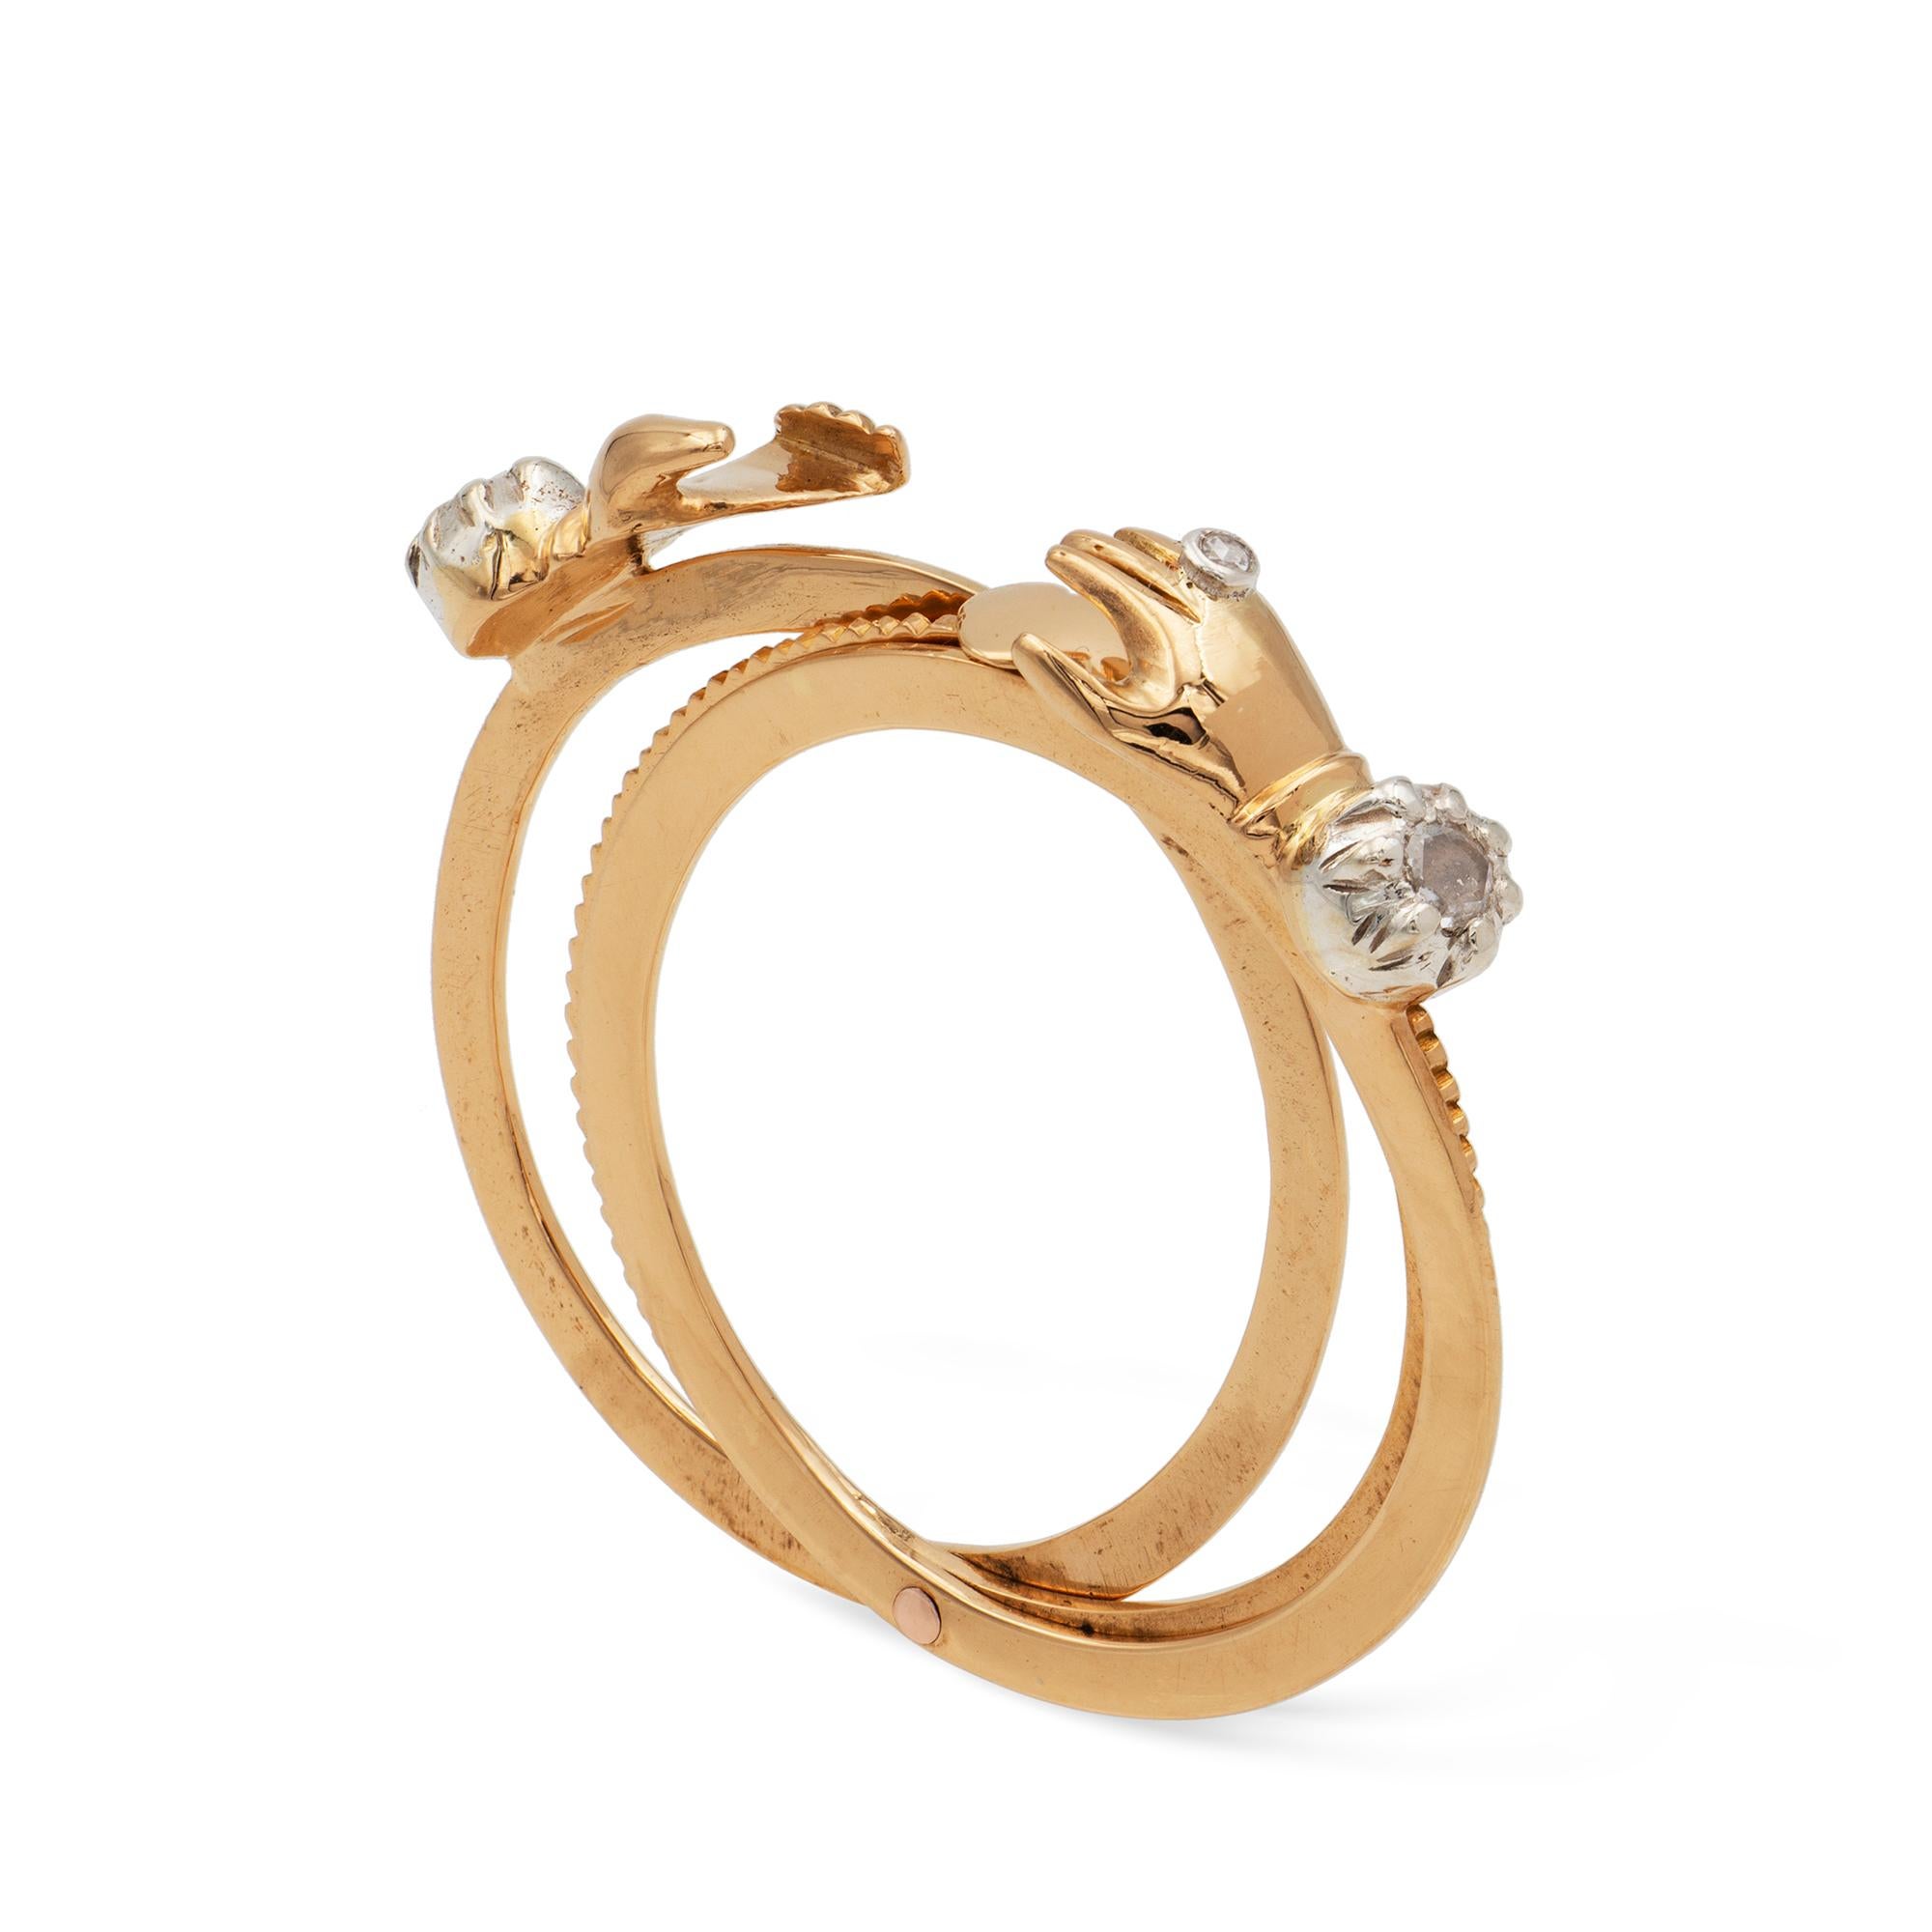 A Georgian fedé and gimmel ring, consisting of two outer flat and one middle ridged yellow gold hoops linked together, with the same shank split lengthwise so the hoops fit together unnoticeably as one, embellished with two interlocking hands,